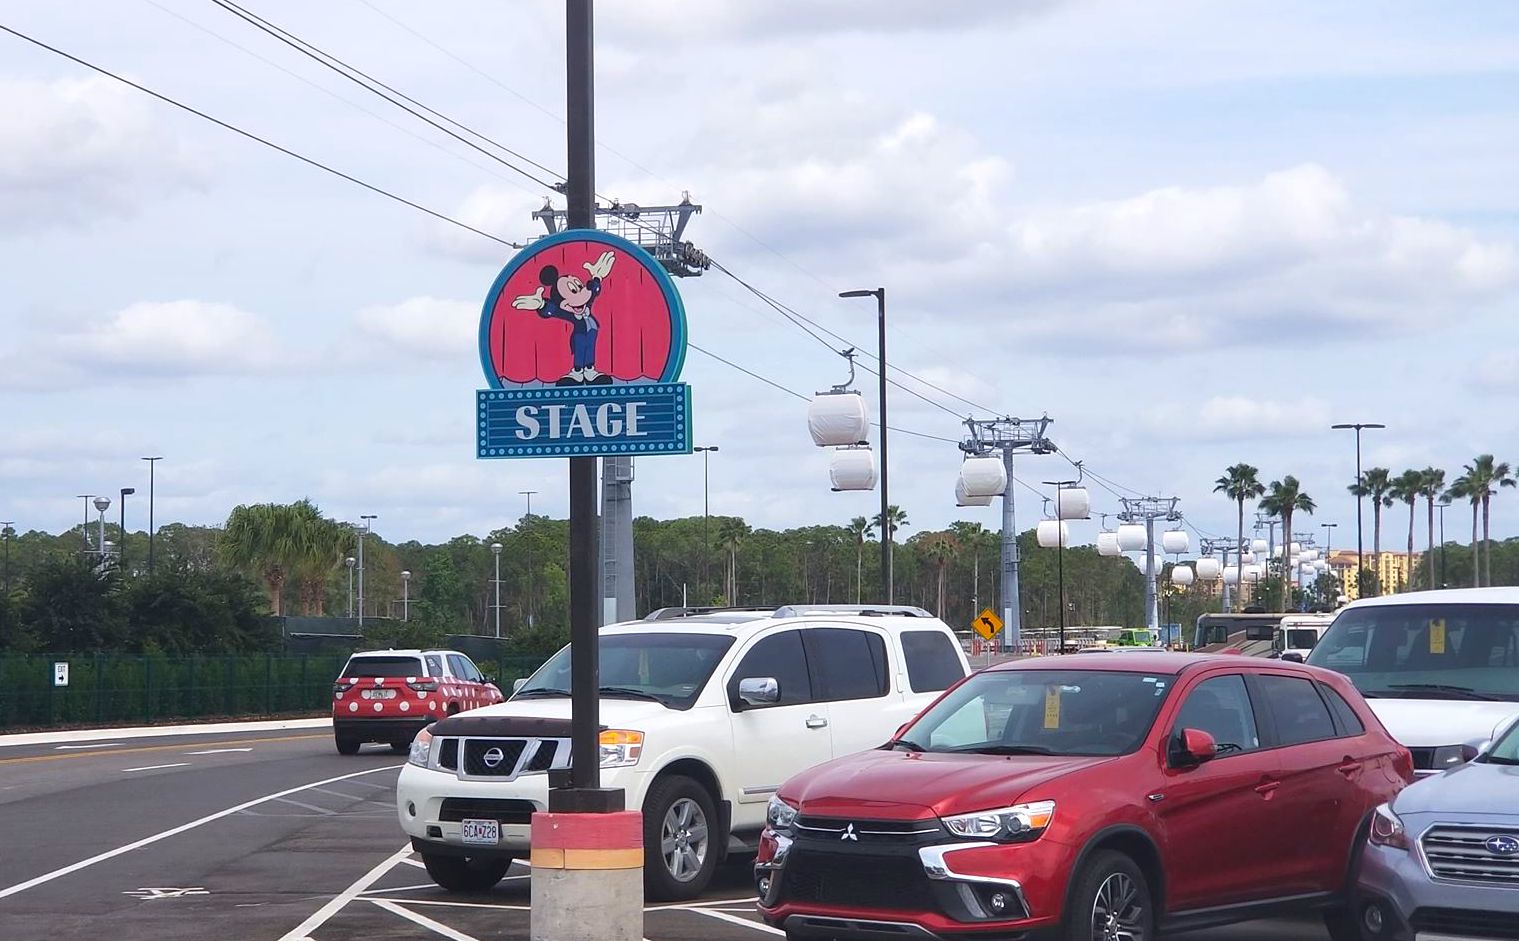 Changes Coming to Parking at Disney’s Hollywood Studios